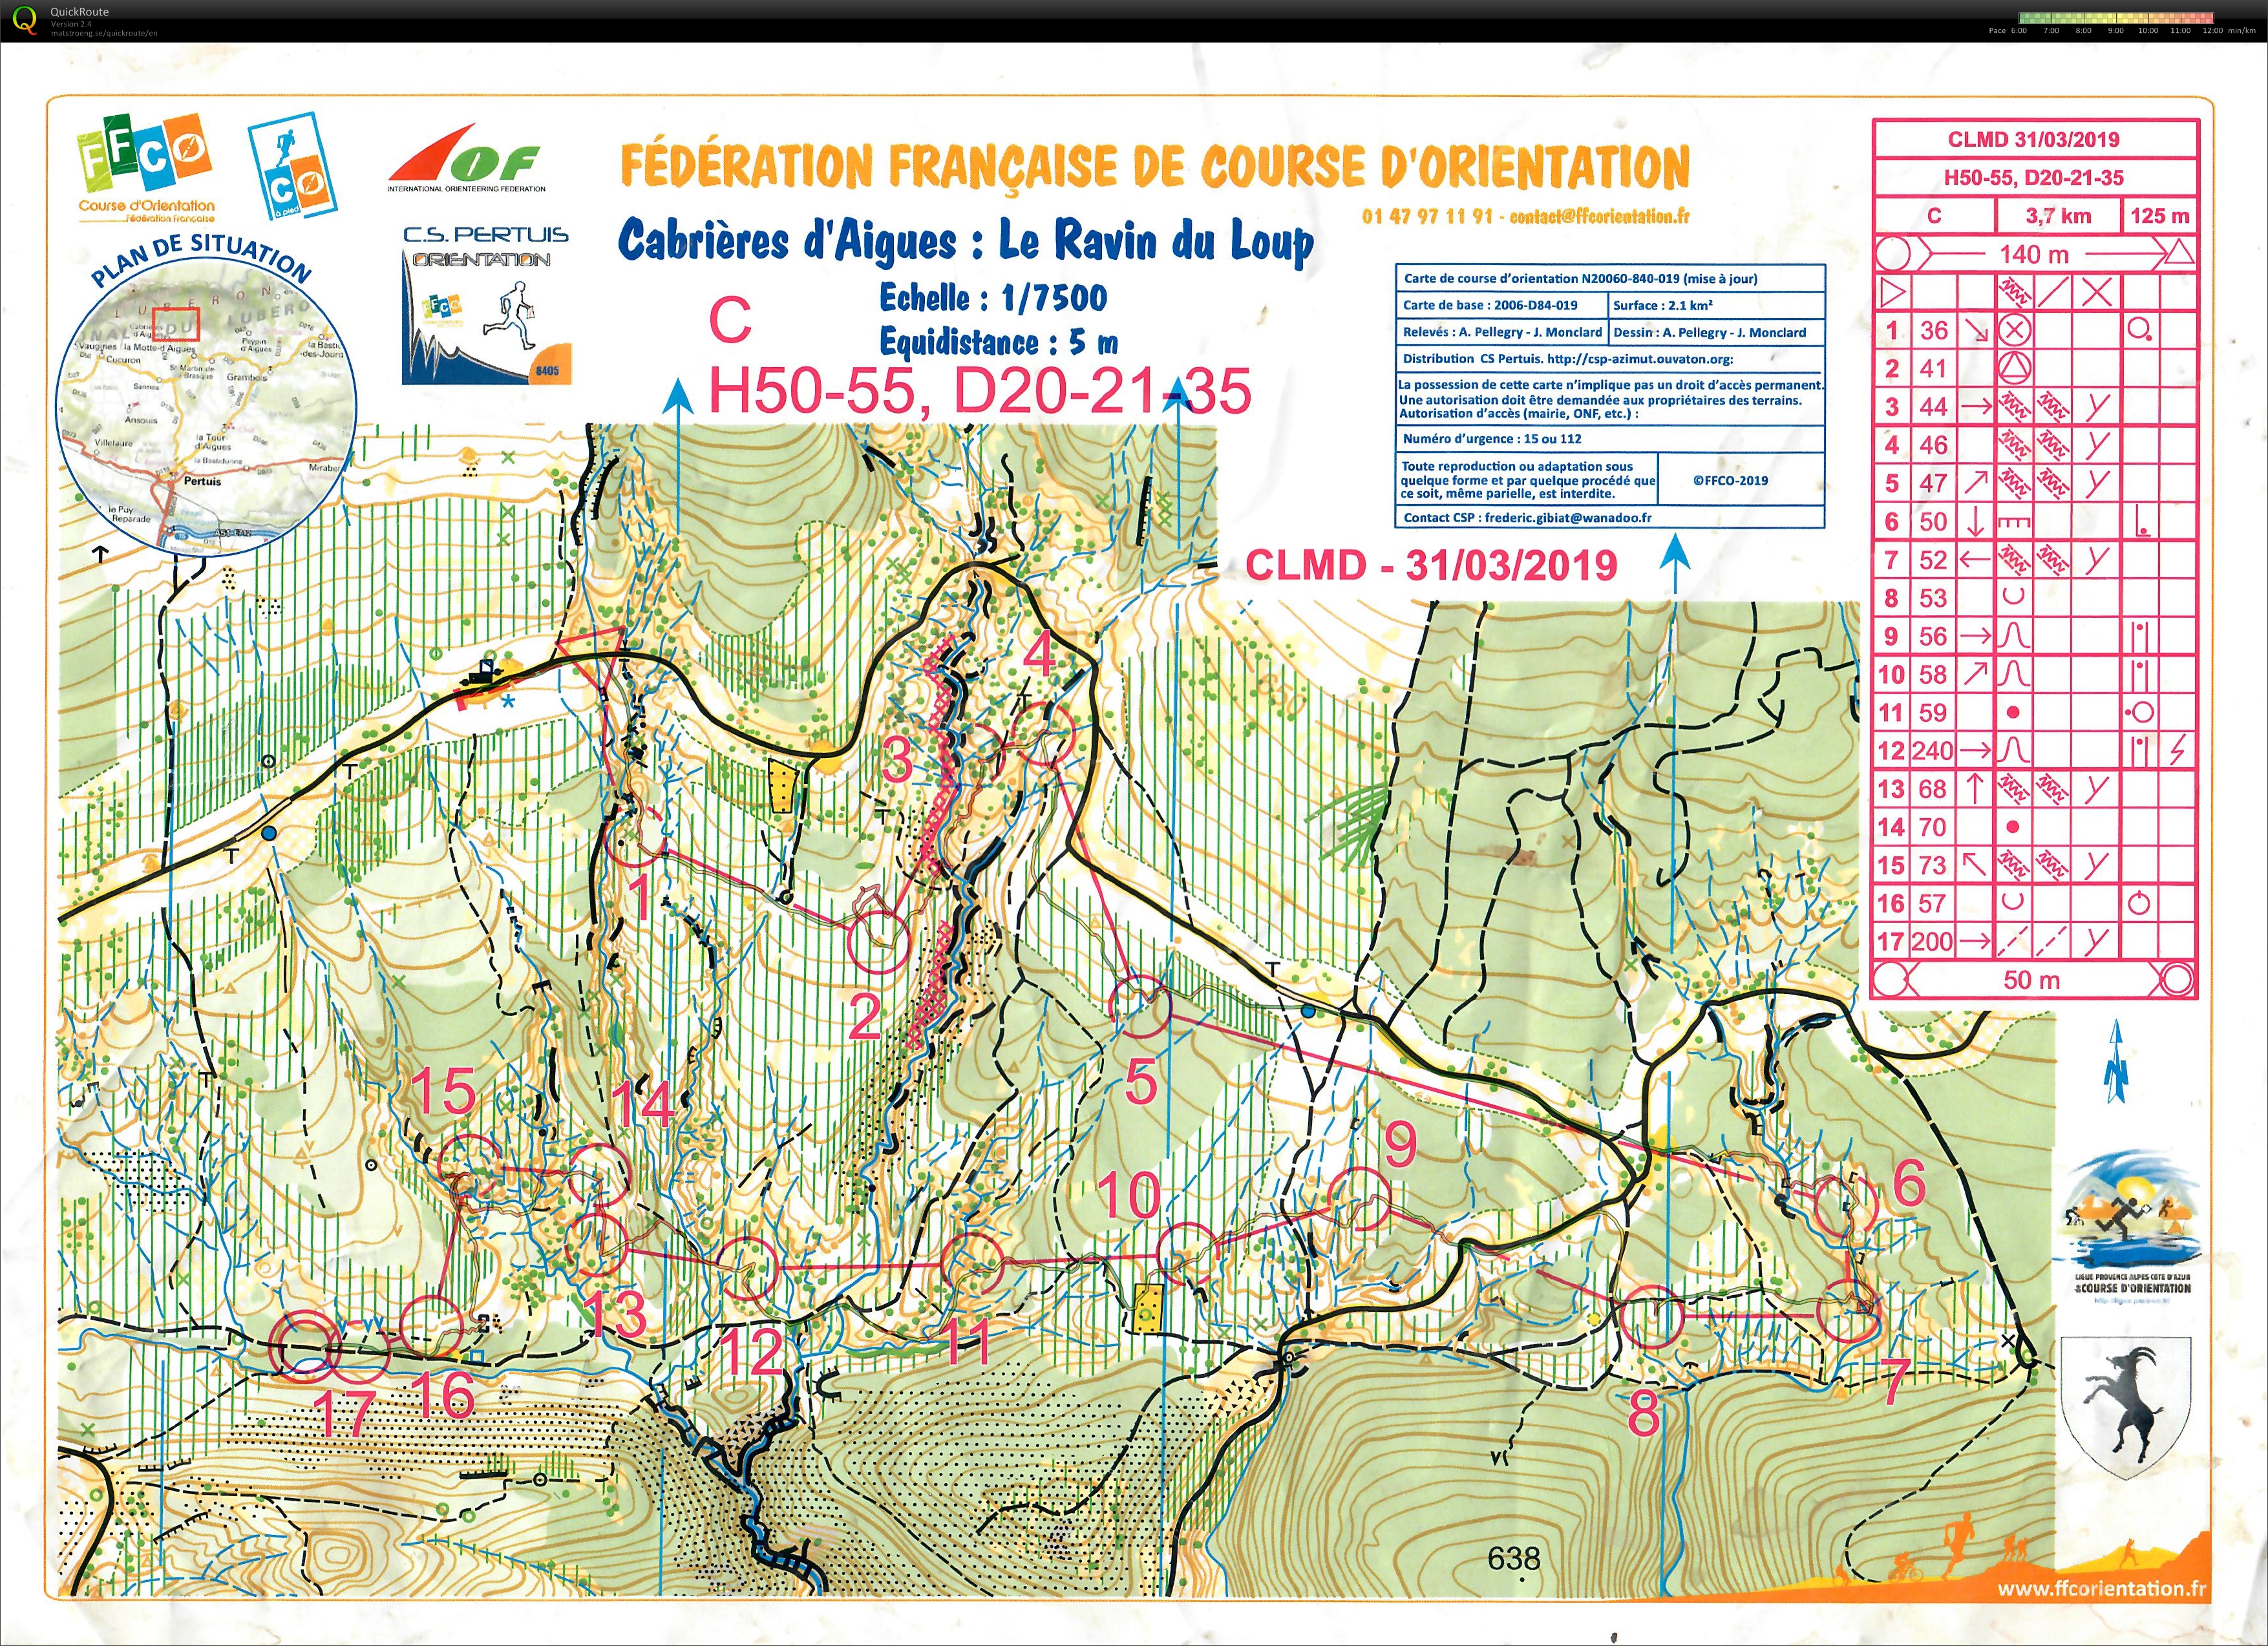 Provence champs middle - Luberon (31.03.2019)